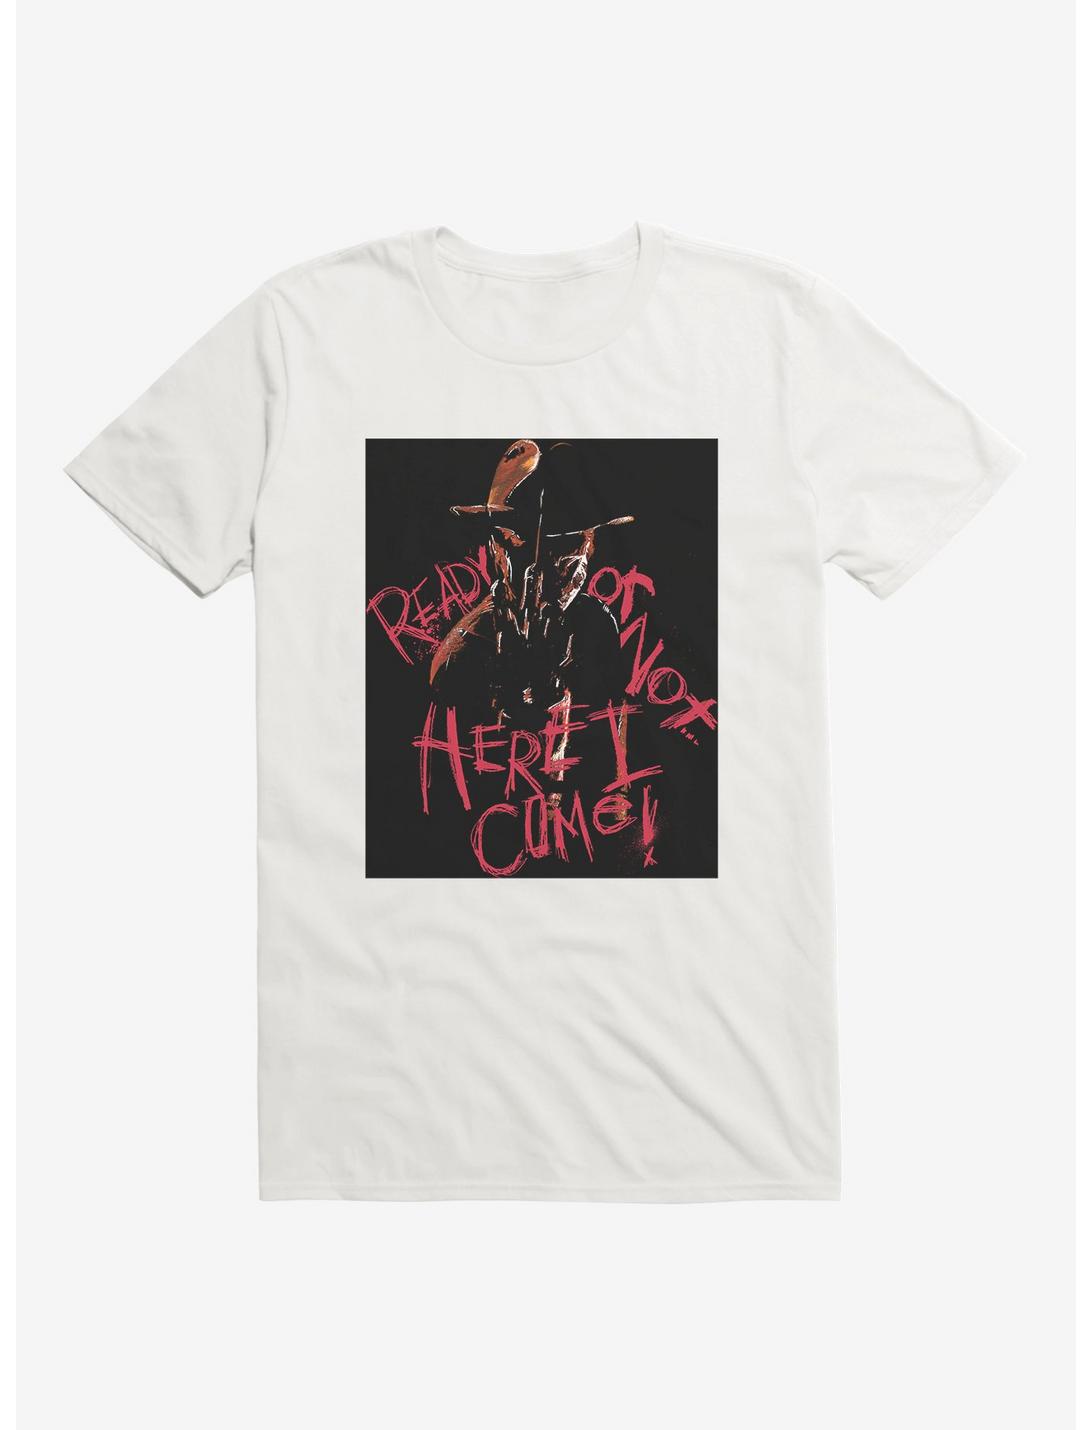 A Nightmare On Elm Street Ready Or Not T-Shirt, WHITE, hi-res